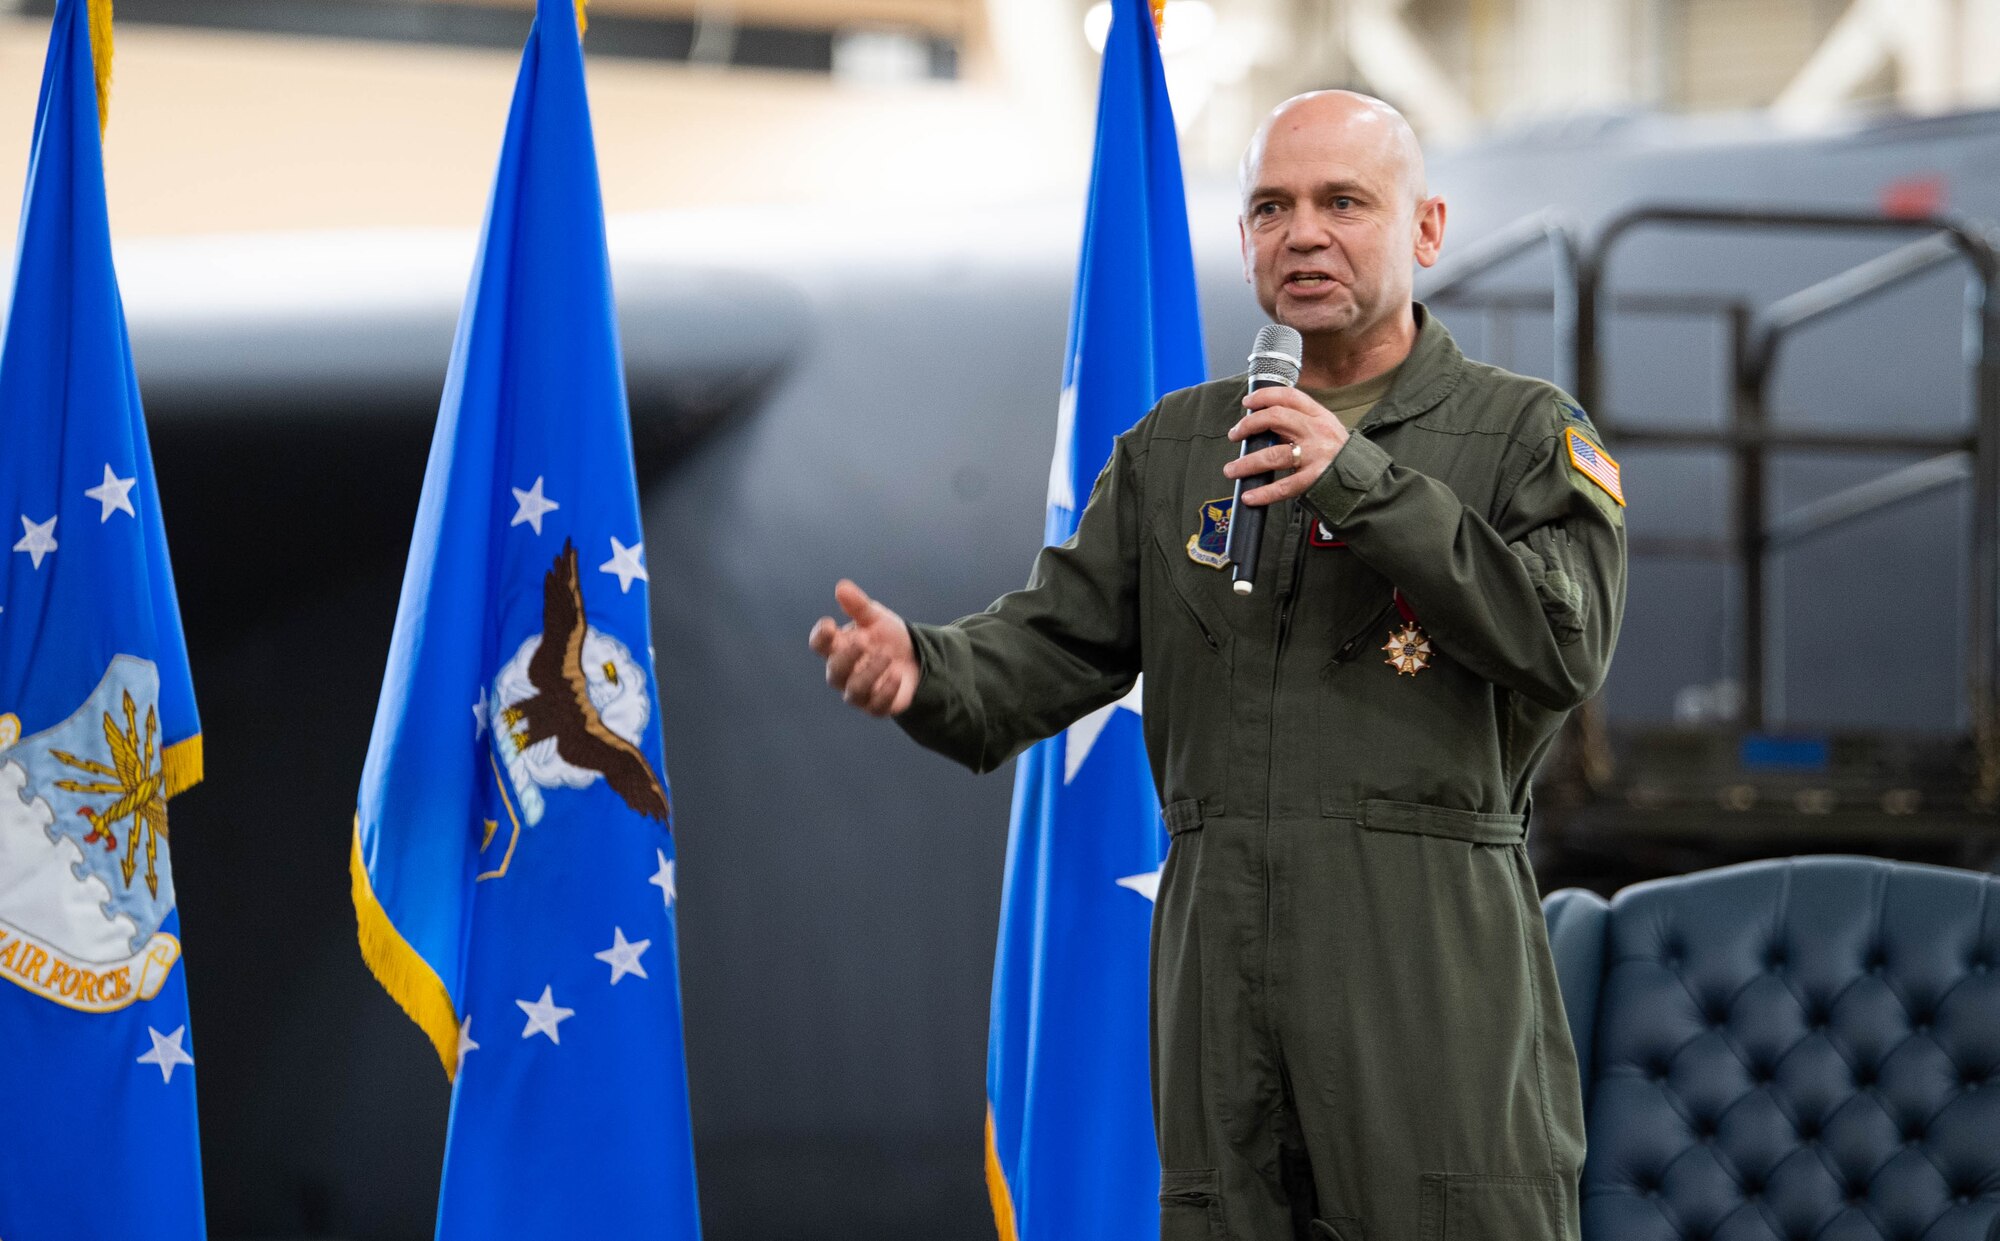 Col. Craig M. Ramsey, outgoing U.S. Air Force Nuclear Command, Control and Communications commander, makes remarks during the AFNC3 Center's deactivation ceremony at Barksdale Air Force Base, Louisiana, June 4, 2021. Originally stood up by AFGSC in 2017, the AFNC3 Center was formally deactivated June 4. (U.S. Air Force photo by Senior Airman Jacob B. Wrightsman)